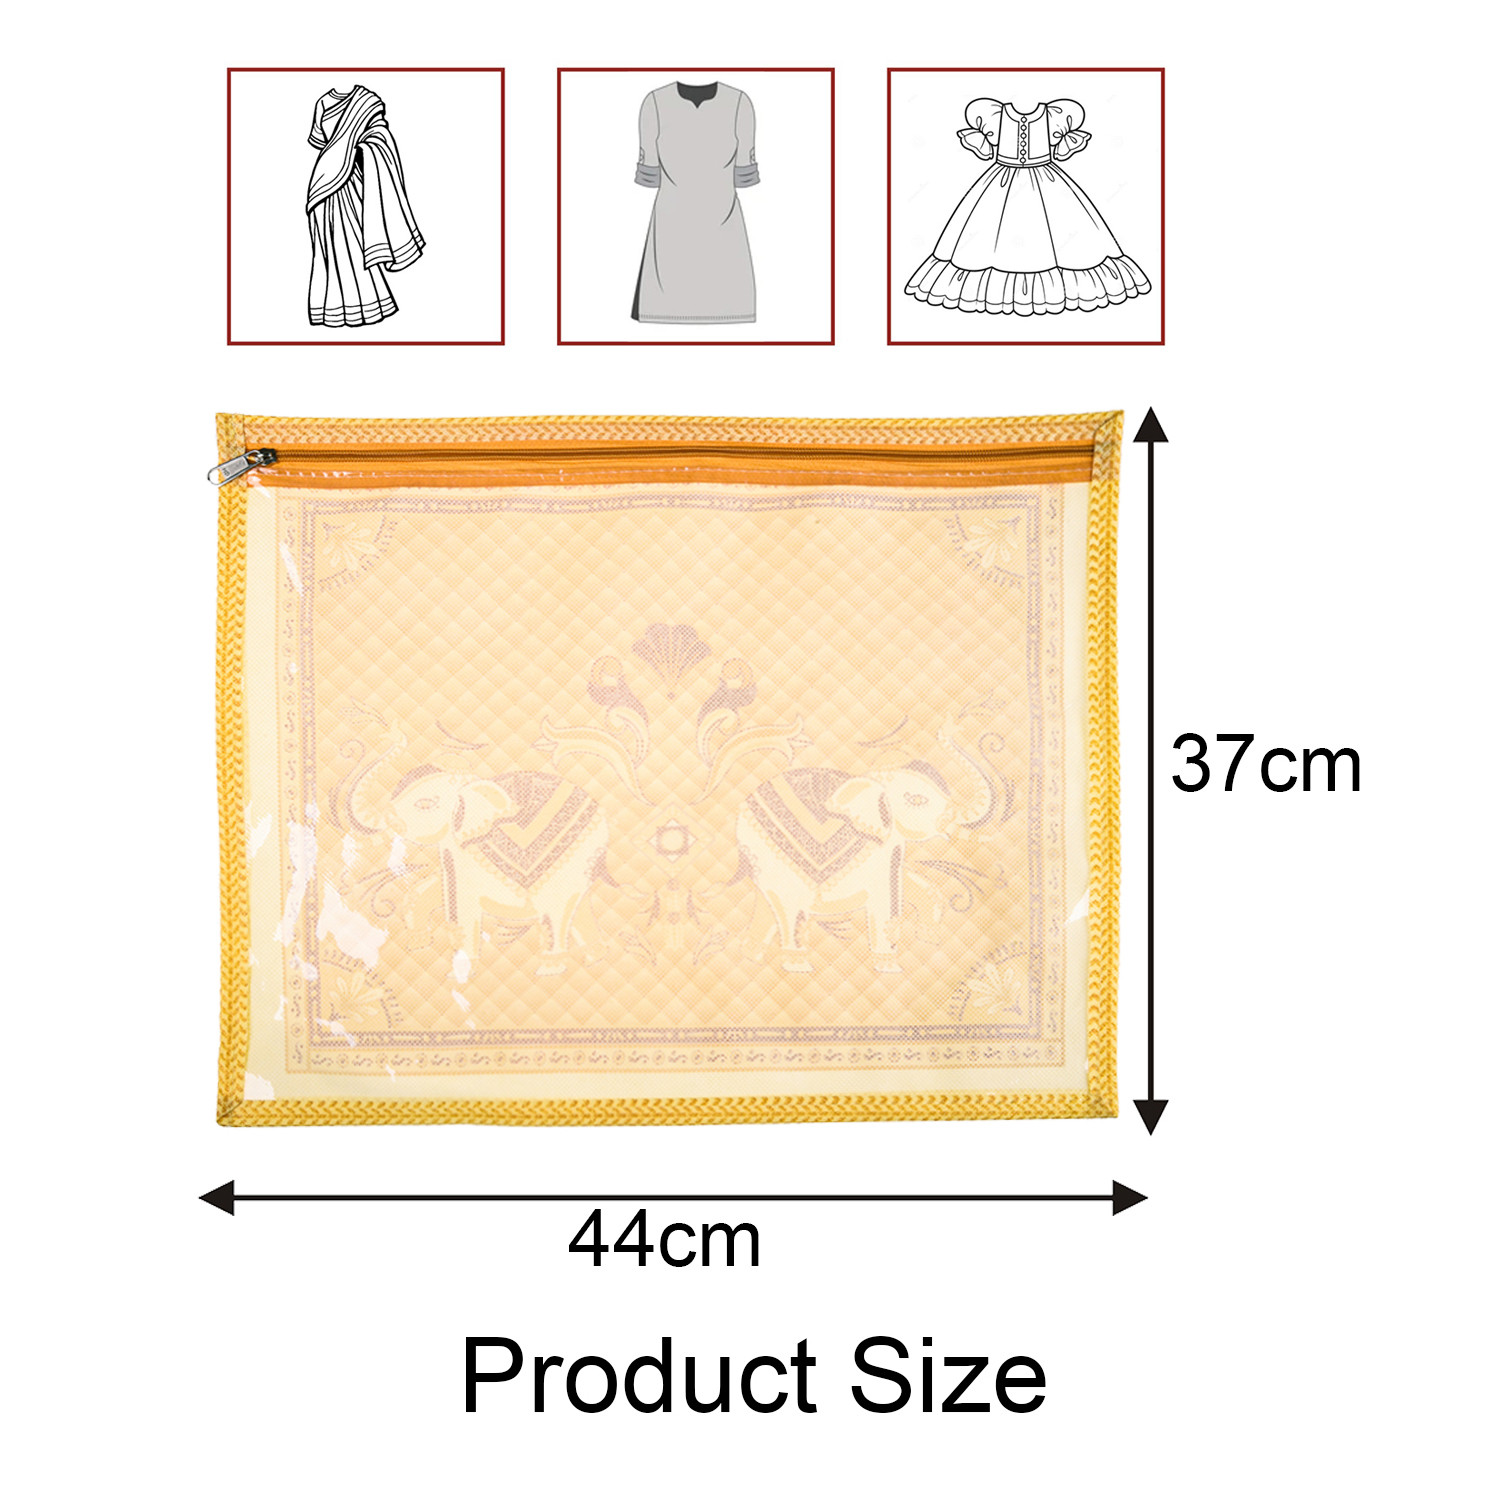 Kuber Industries Single Packing Saree Cover|Non-Woven Elephant Print Storage Cover|Foldable Transparent Top Wardrobe Storage Bag (Cream)